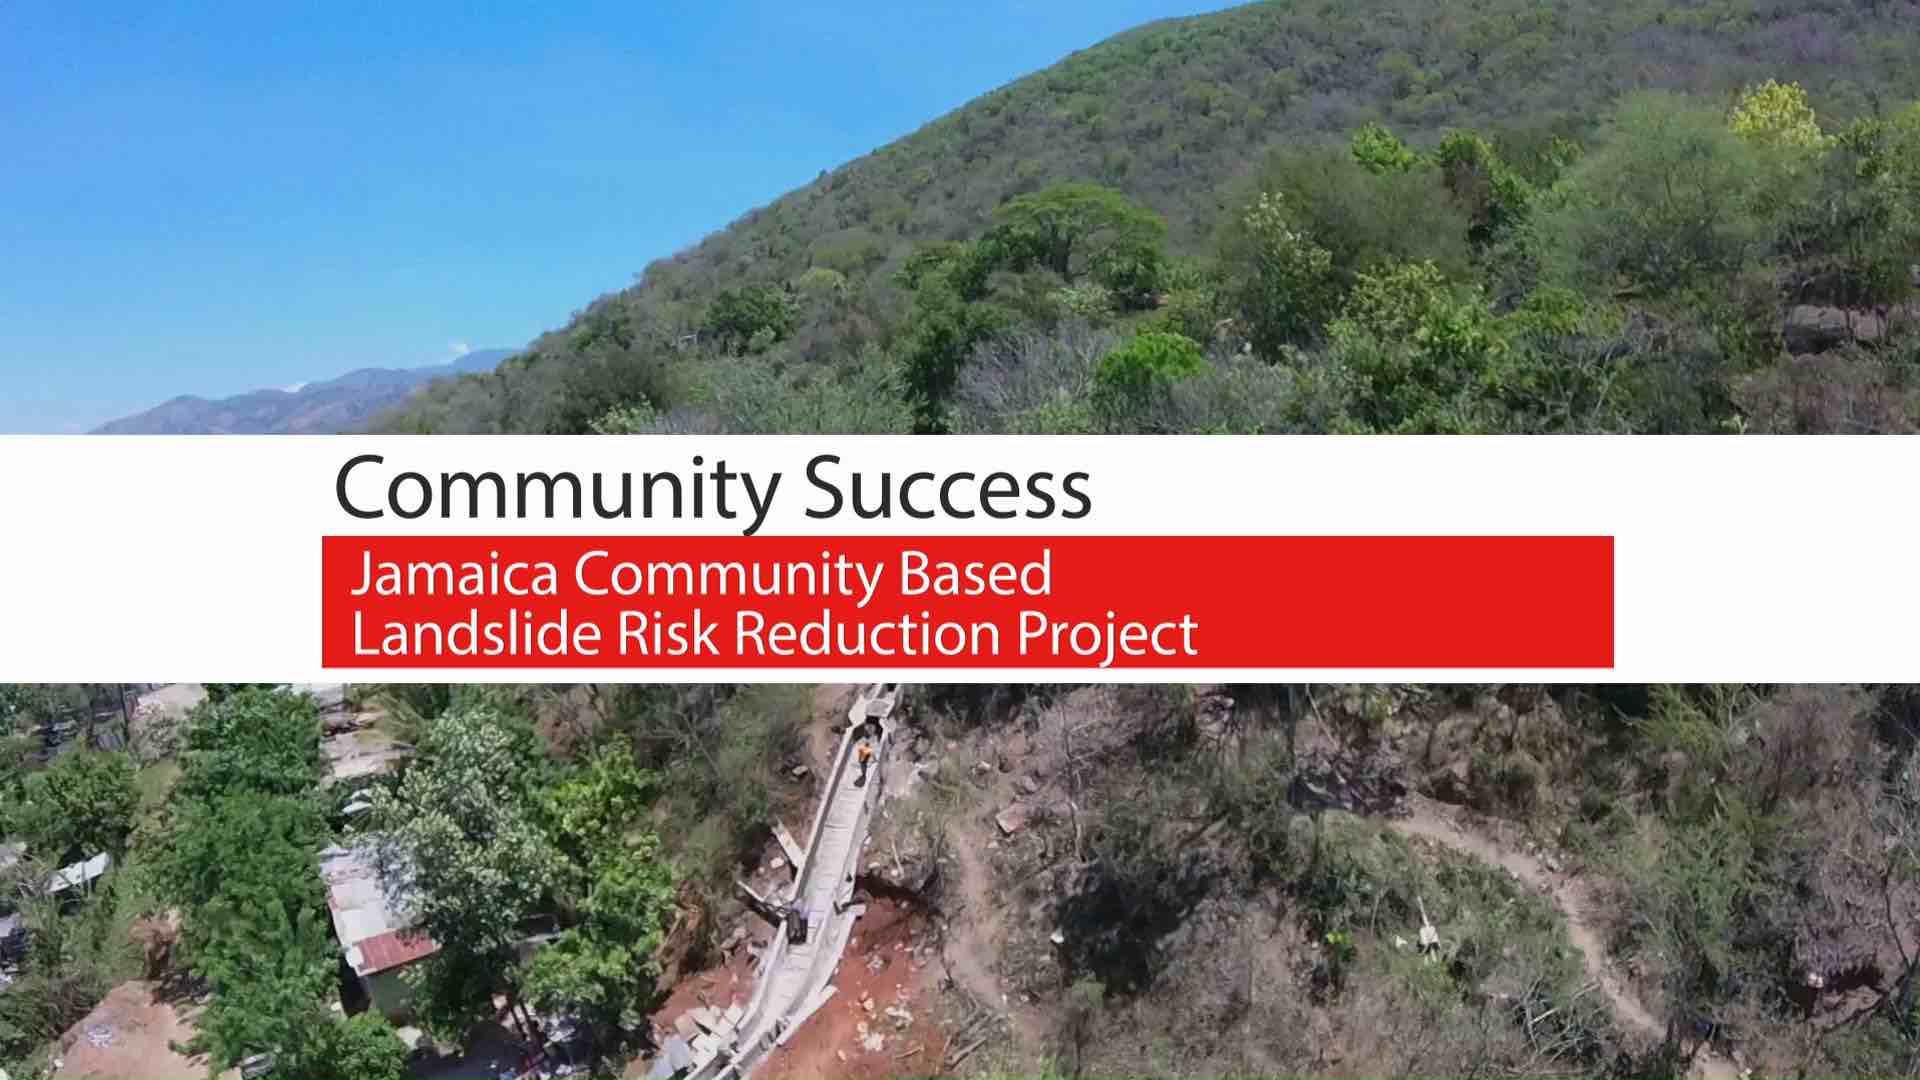 Jamaica Community-Based Landslide Risk Reduction Pilot Project was implemented by the Office for Disaster Preparedness and Emergency Management (ODPEM)